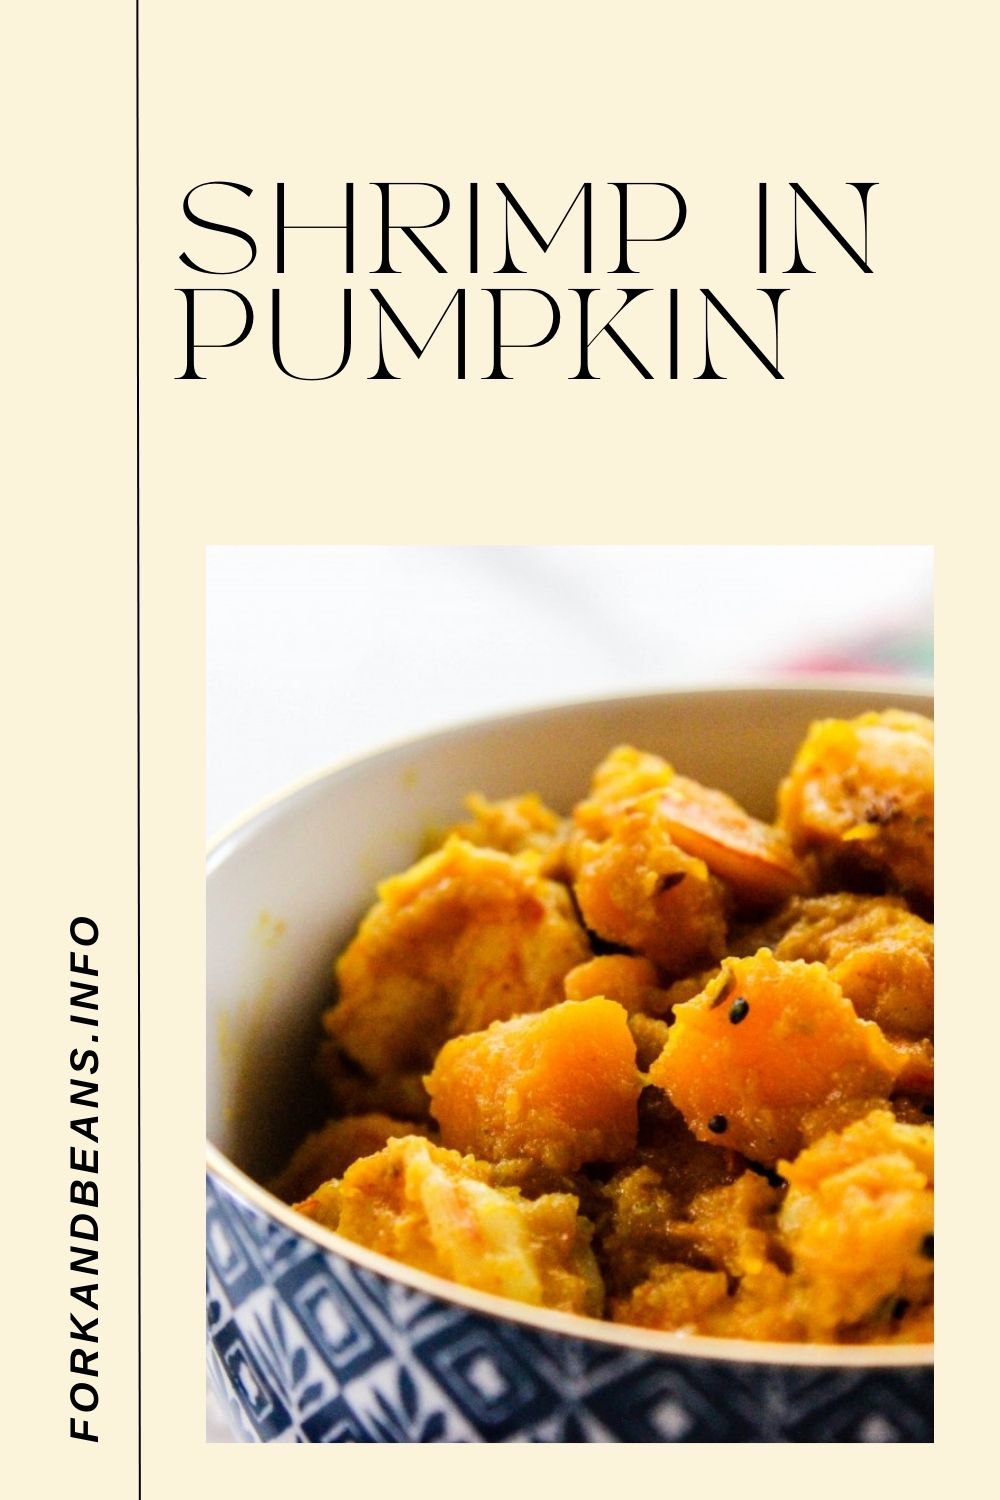 Curry with pumpkin and shrimp